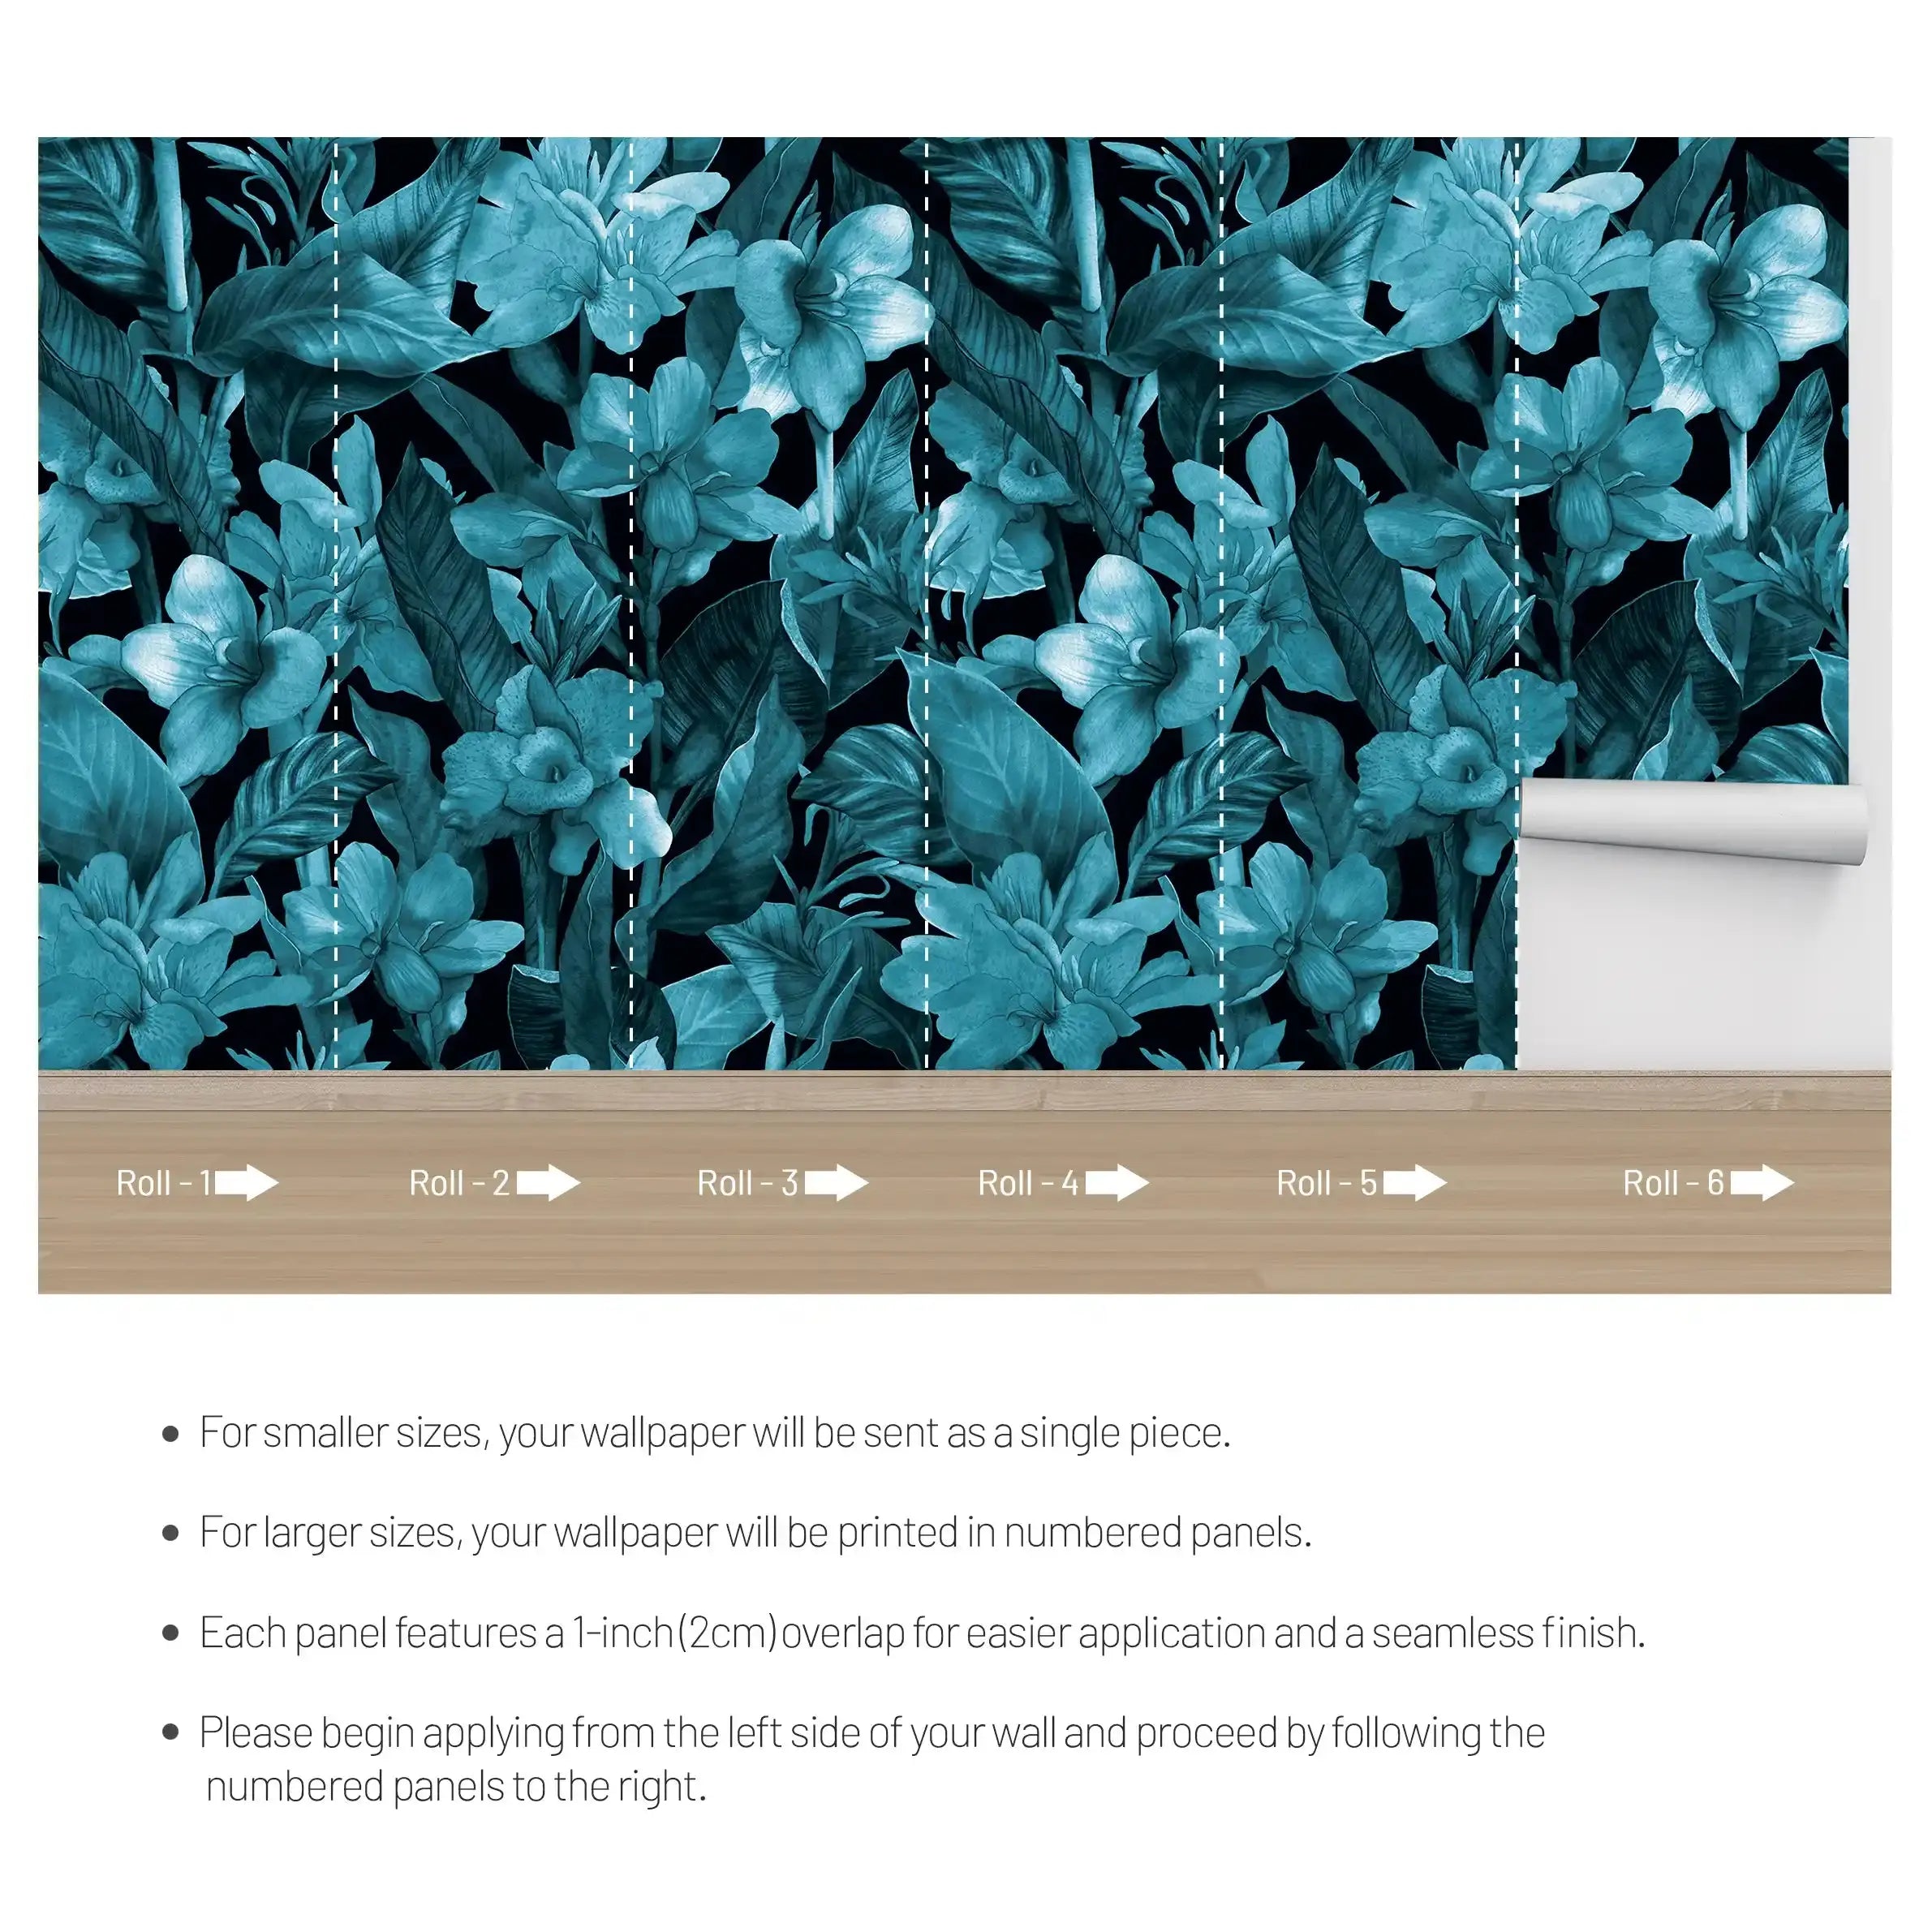 3074-C / Botanical Peel and Stick Wallpaper: Blue Floral & Black Leaf Pattern, Perfect for Accent Wall Decor - Artevella